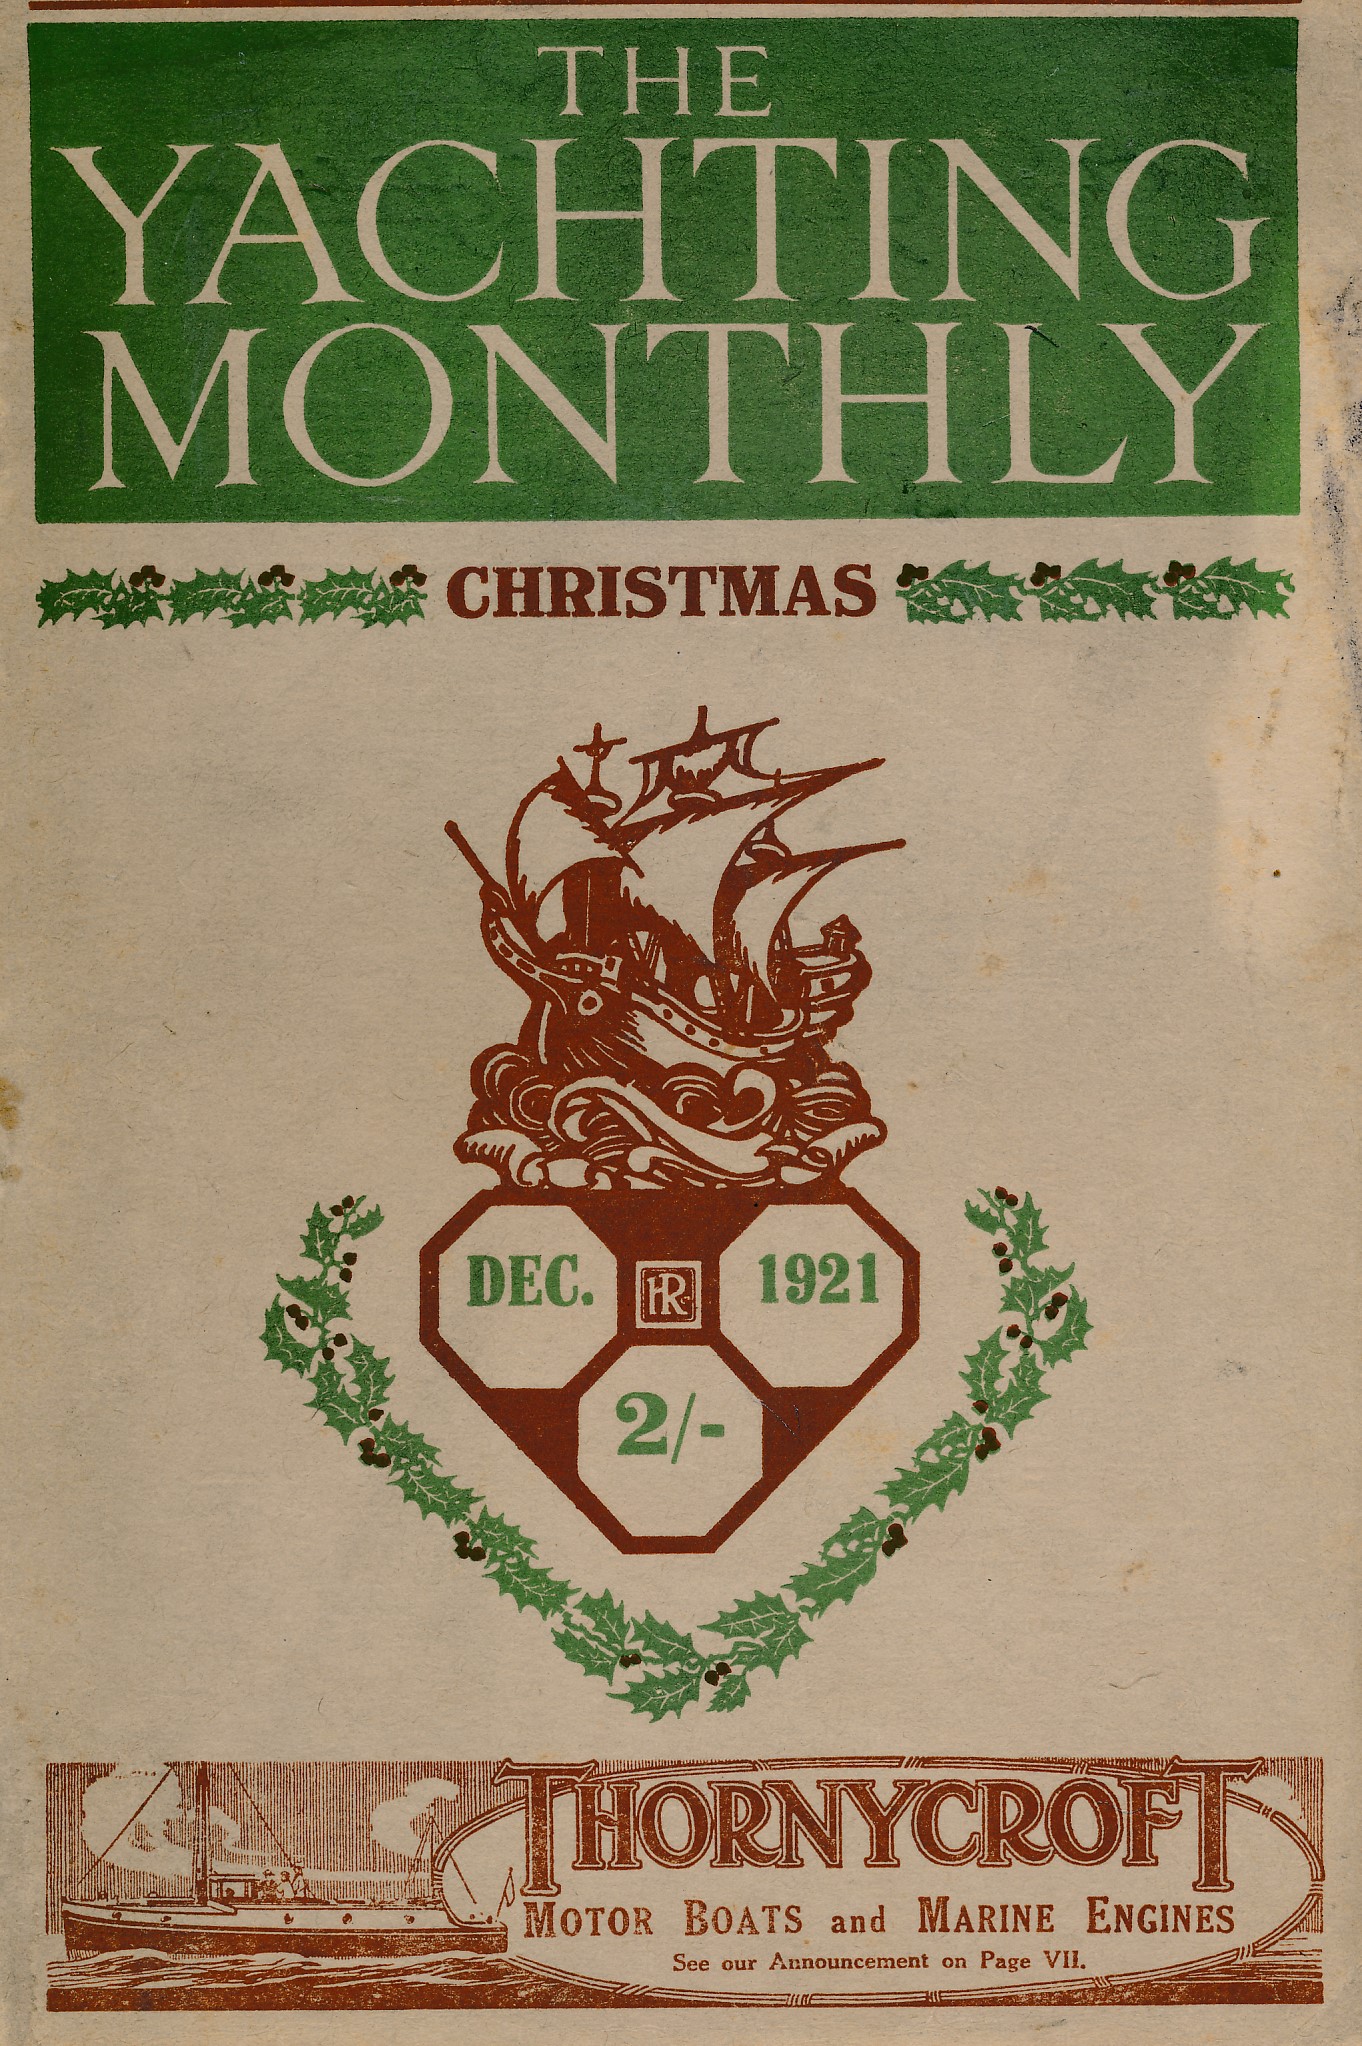 The Yachting Monthly.  Volume 188.- Vol. XXXII.  December, 1921.